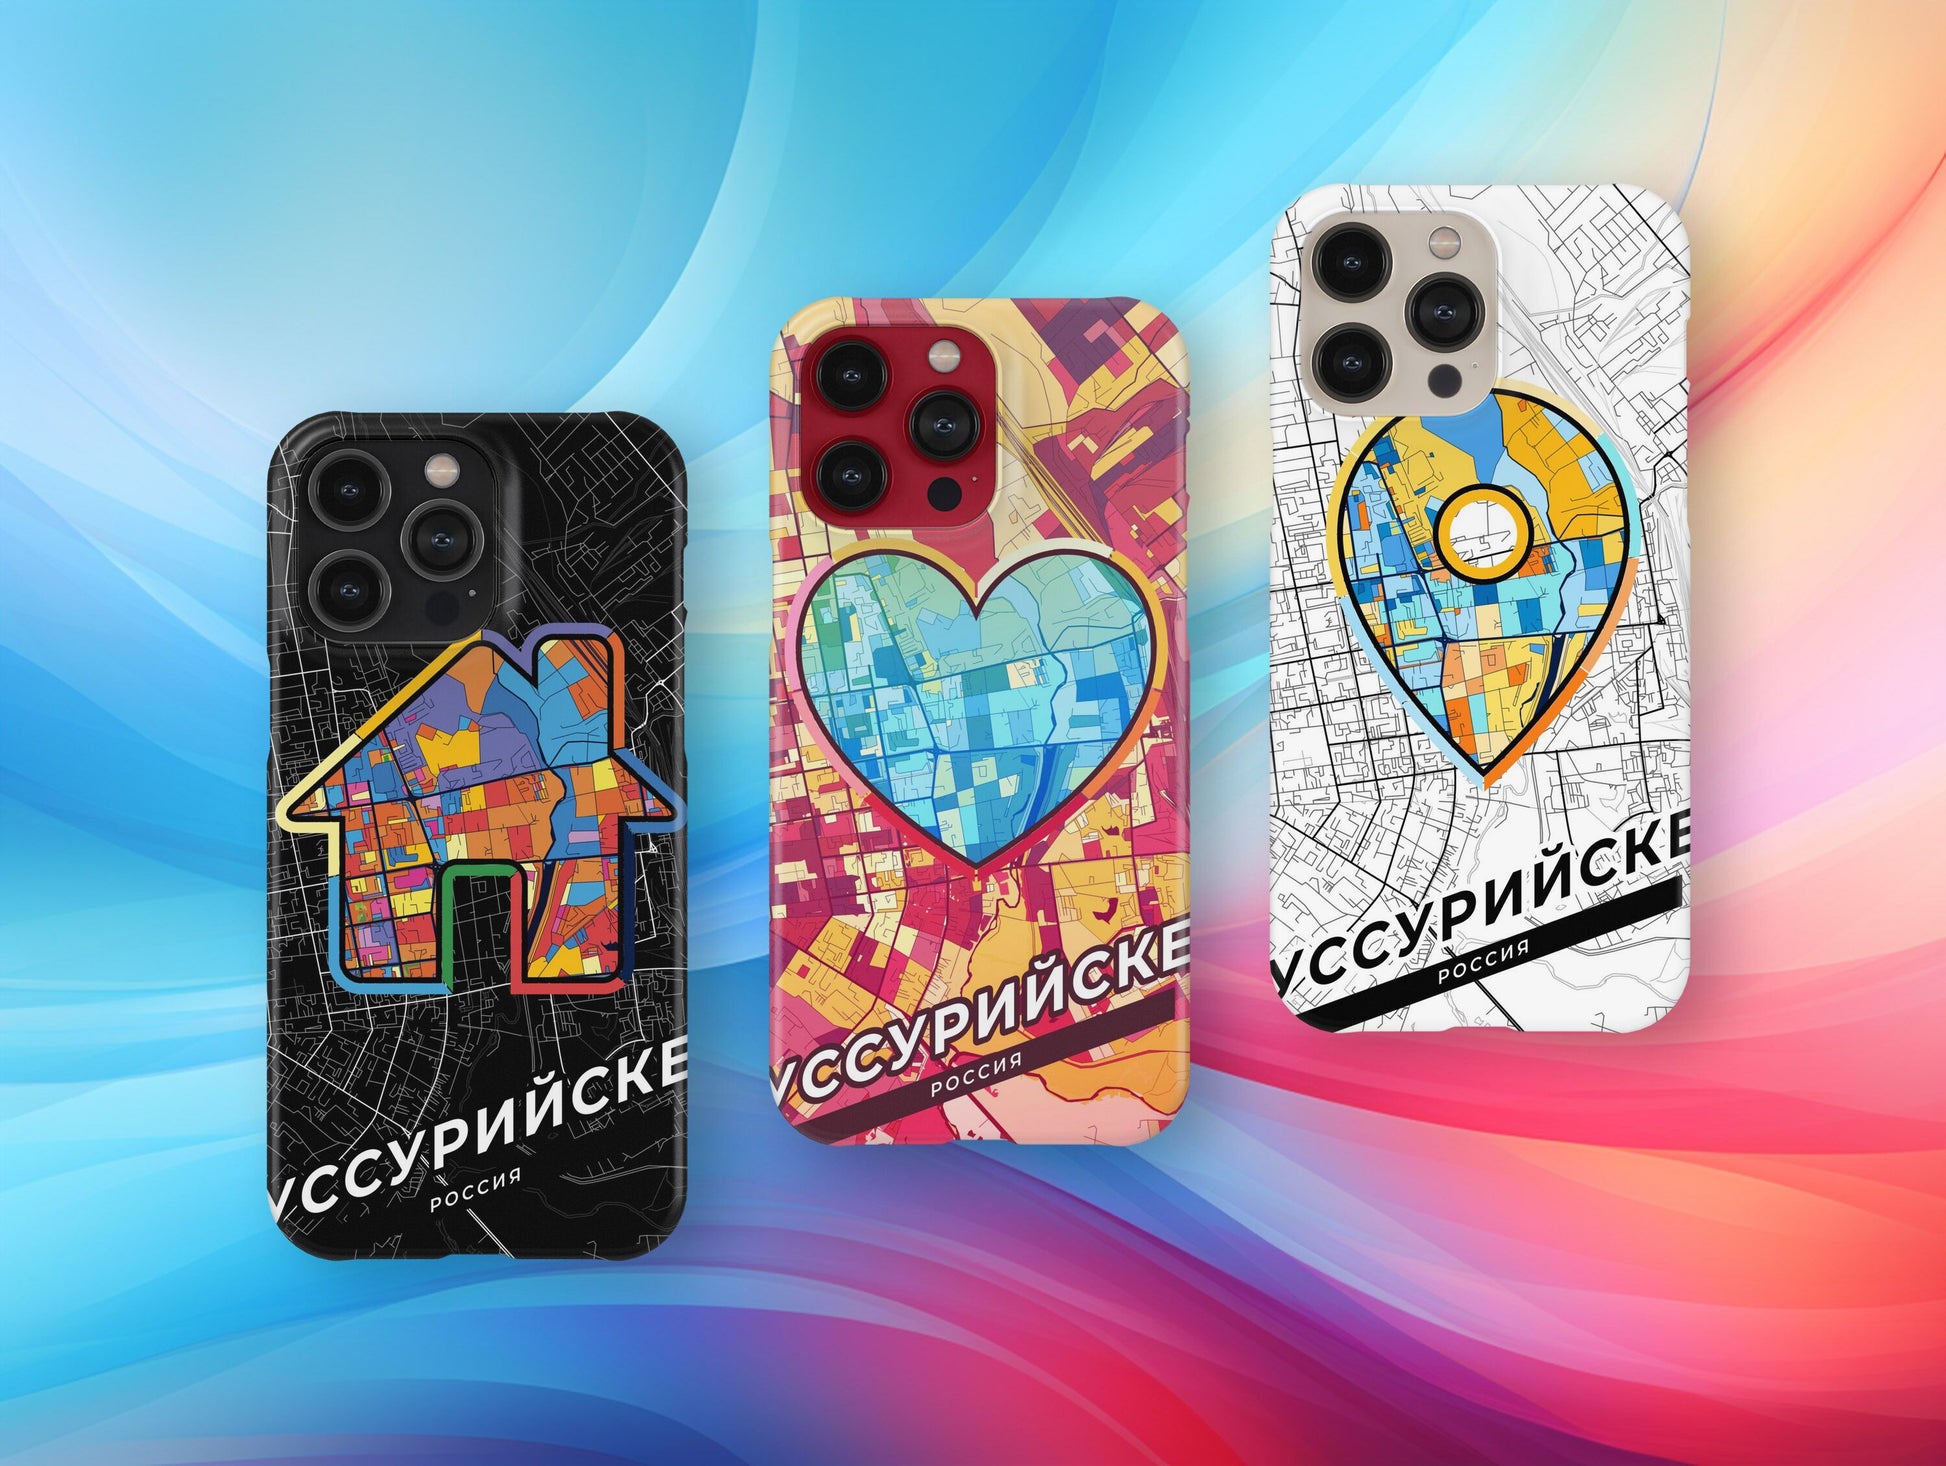 Ussuriysk Russia slim phone case with colorful icon